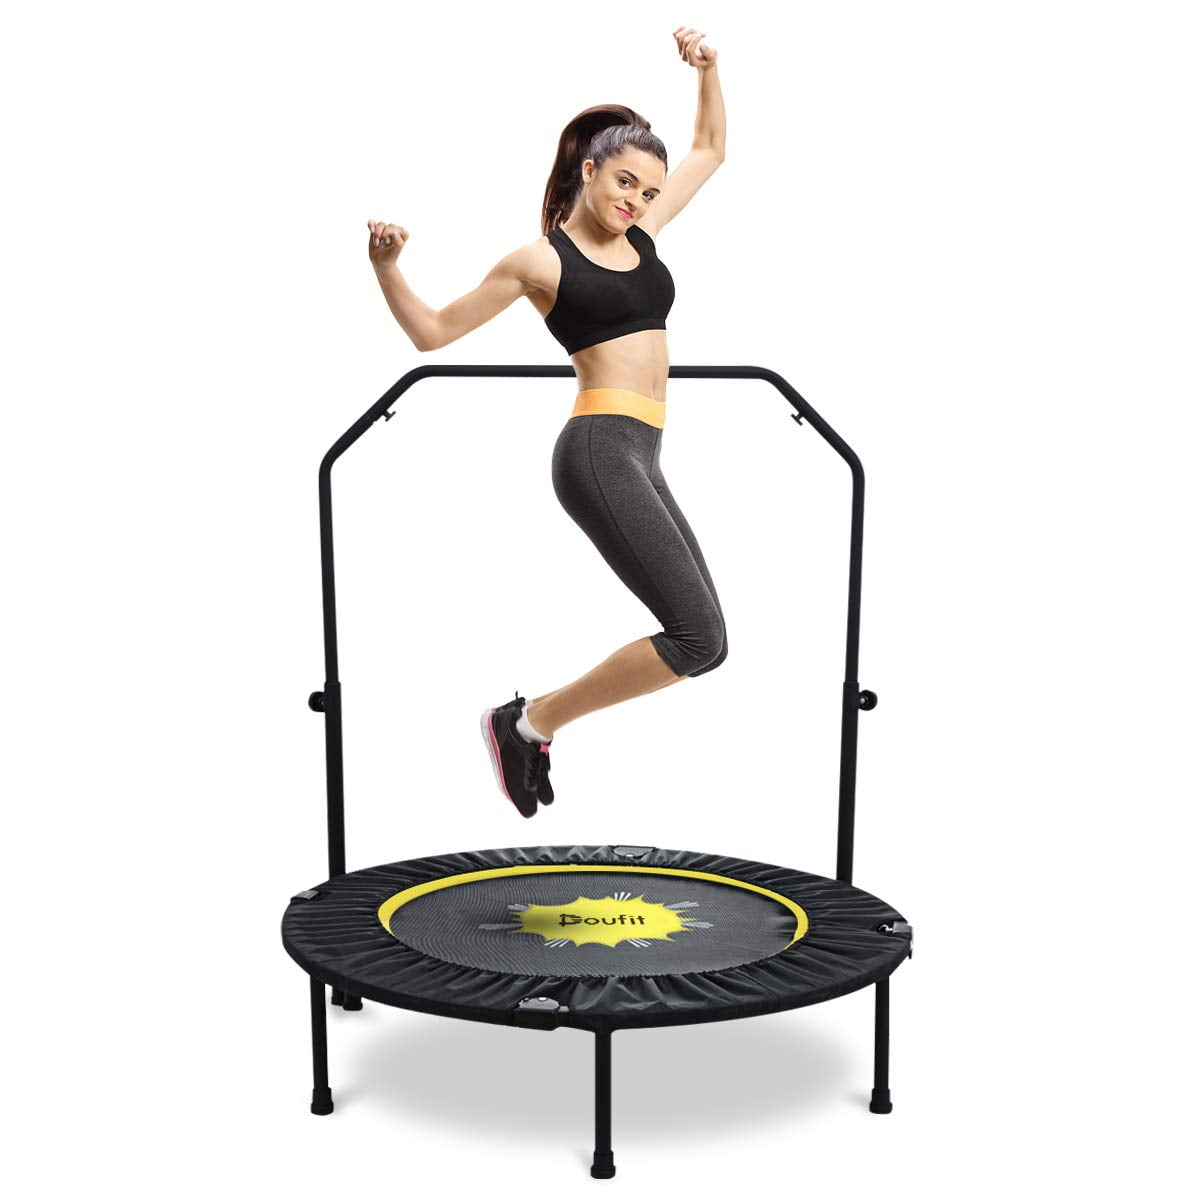 40-Inches Foldable Rebounder Trampoline for Kids Adults Fitness with Adjustable Handlebar, Indoor Exercise Gym Yoga Workout